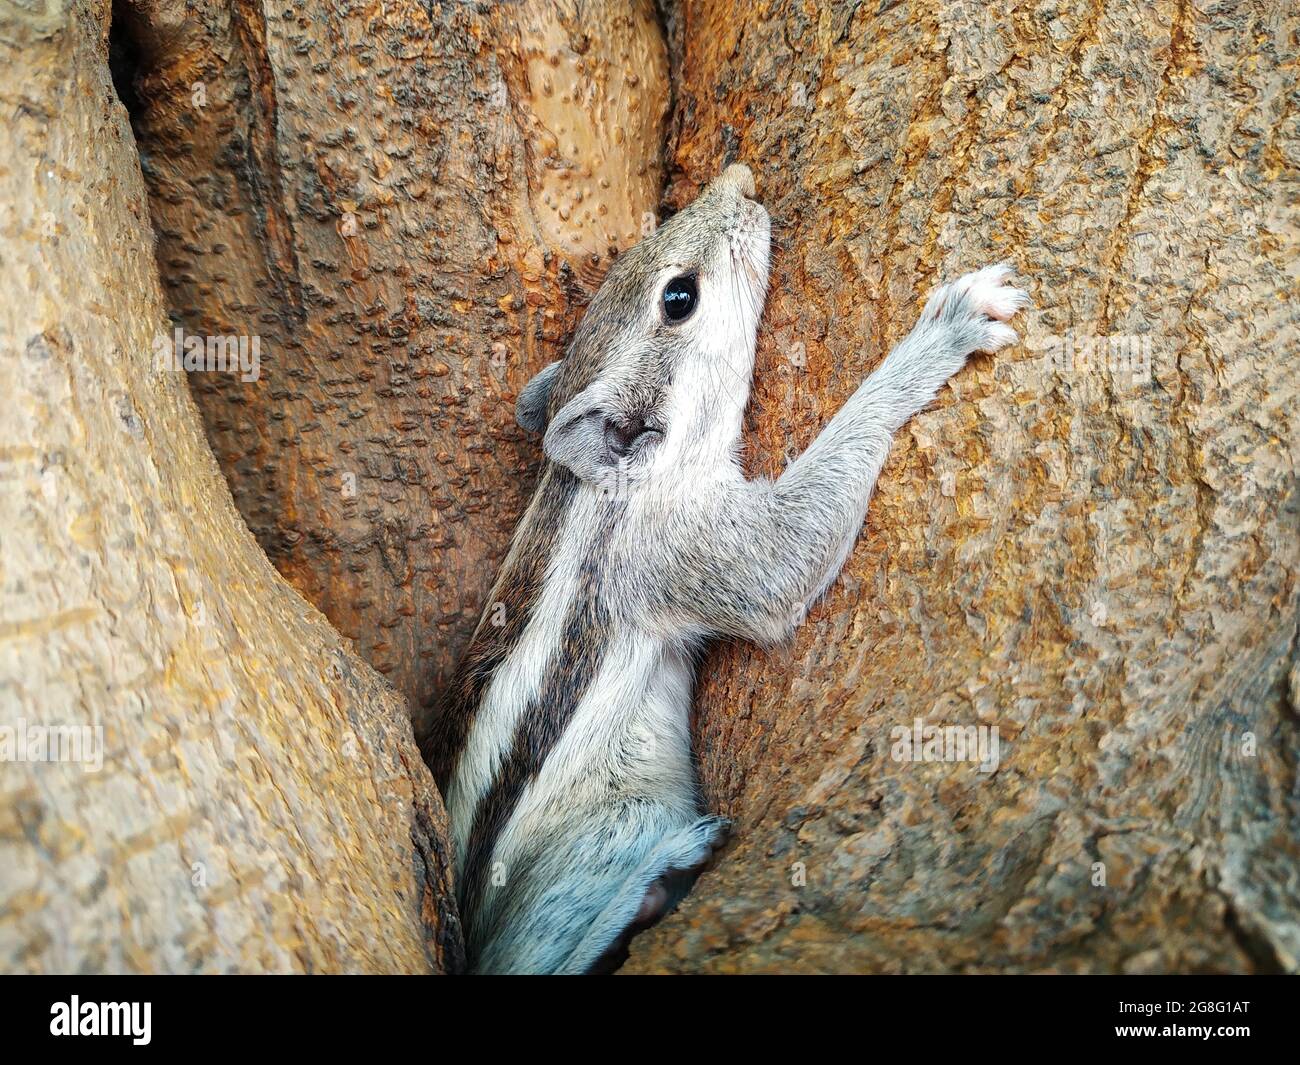 Closeeup shot of a small chipmunk on the tree trunk Stock Photo